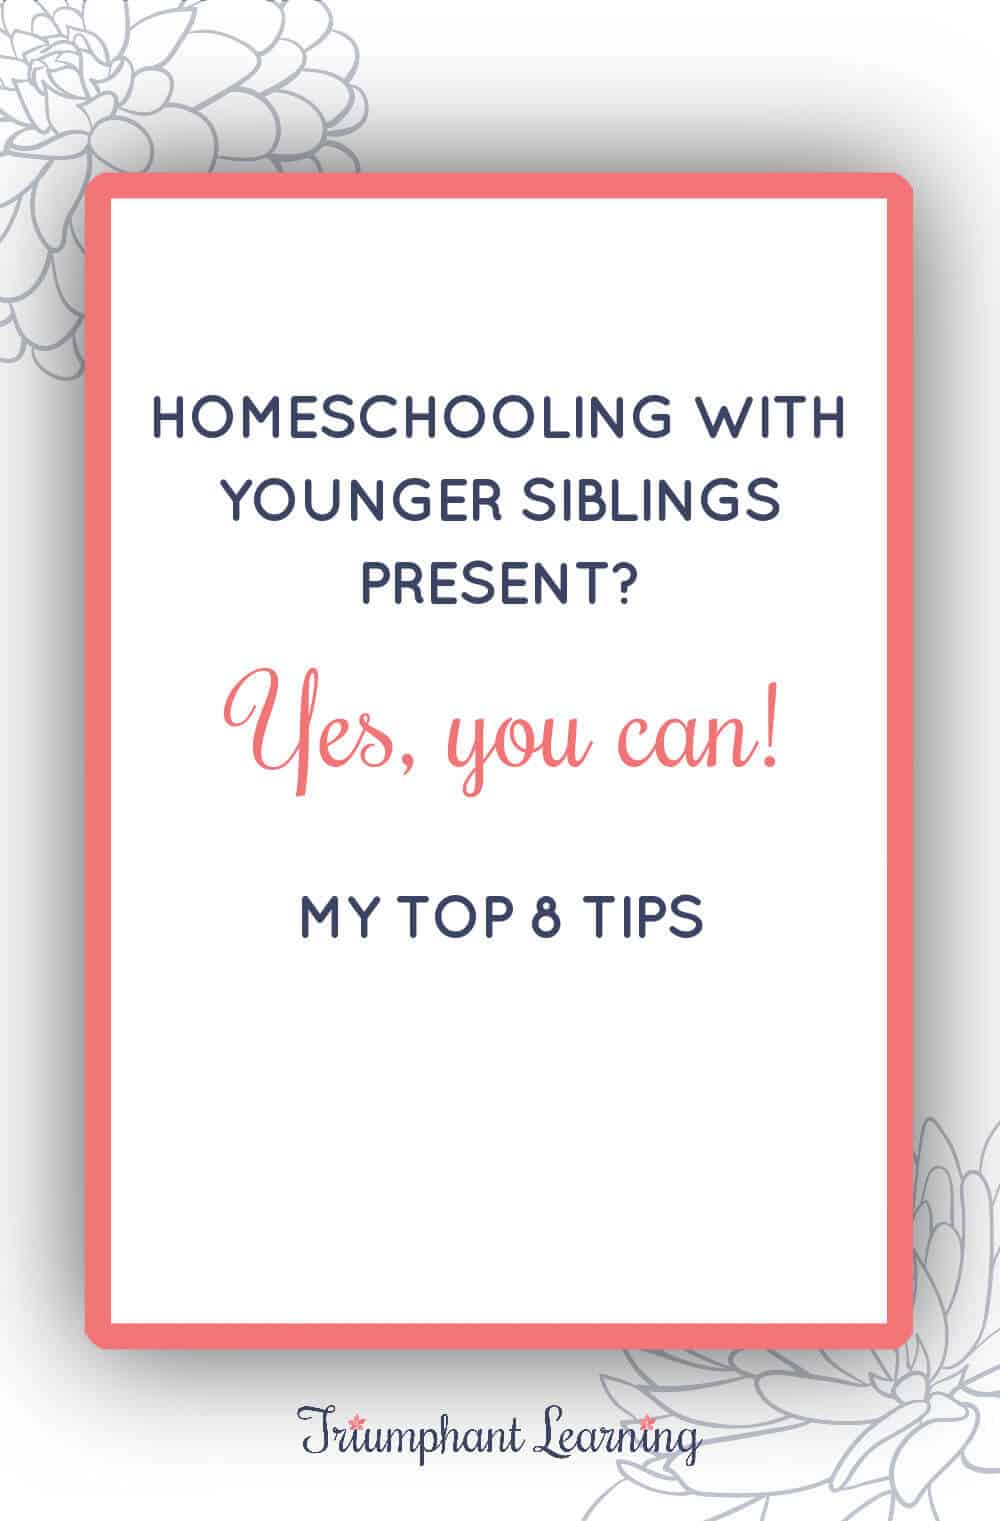 Homeschooling with younger siblings around can be distracting. Learn eight strategies for a successful homeschool day with toddlers in tow. via @TriLearning